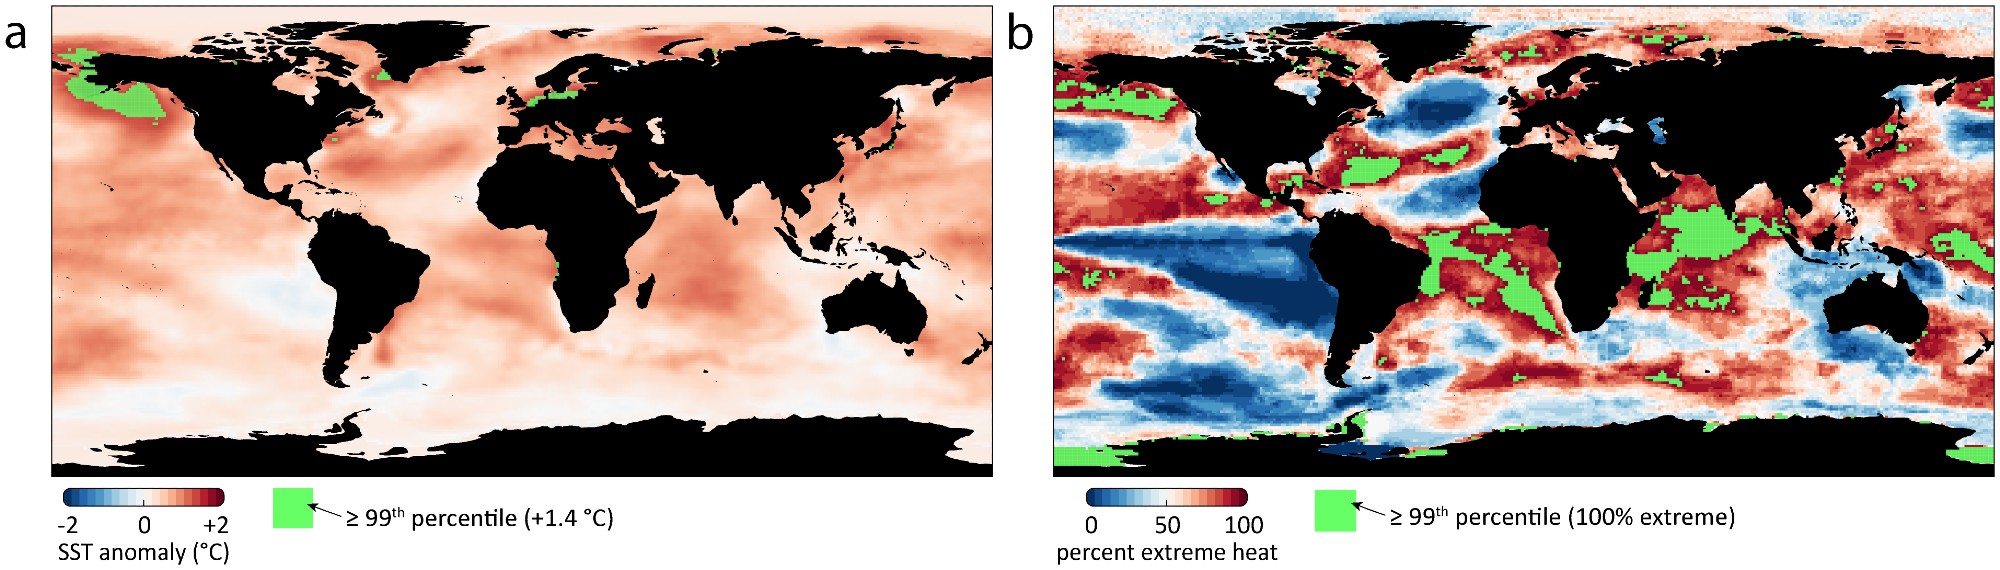 Comparing extreme marine heat metrics for the year 2019. (a) Mean anomaly and (b) percent extreme heat for the global ocean where both series have baselines determined from 1870–1919. Regions in the 99th percentile for each series (+1.4 °C and 100% extreme, respectively) are highlighted in green. This metric constitutes 7% of the global ocean in the extreme heat series, (b) but only 1% for the more traditional mean anomaly approach, (a). The base map layer was drawn using the “rworldmap” R package.